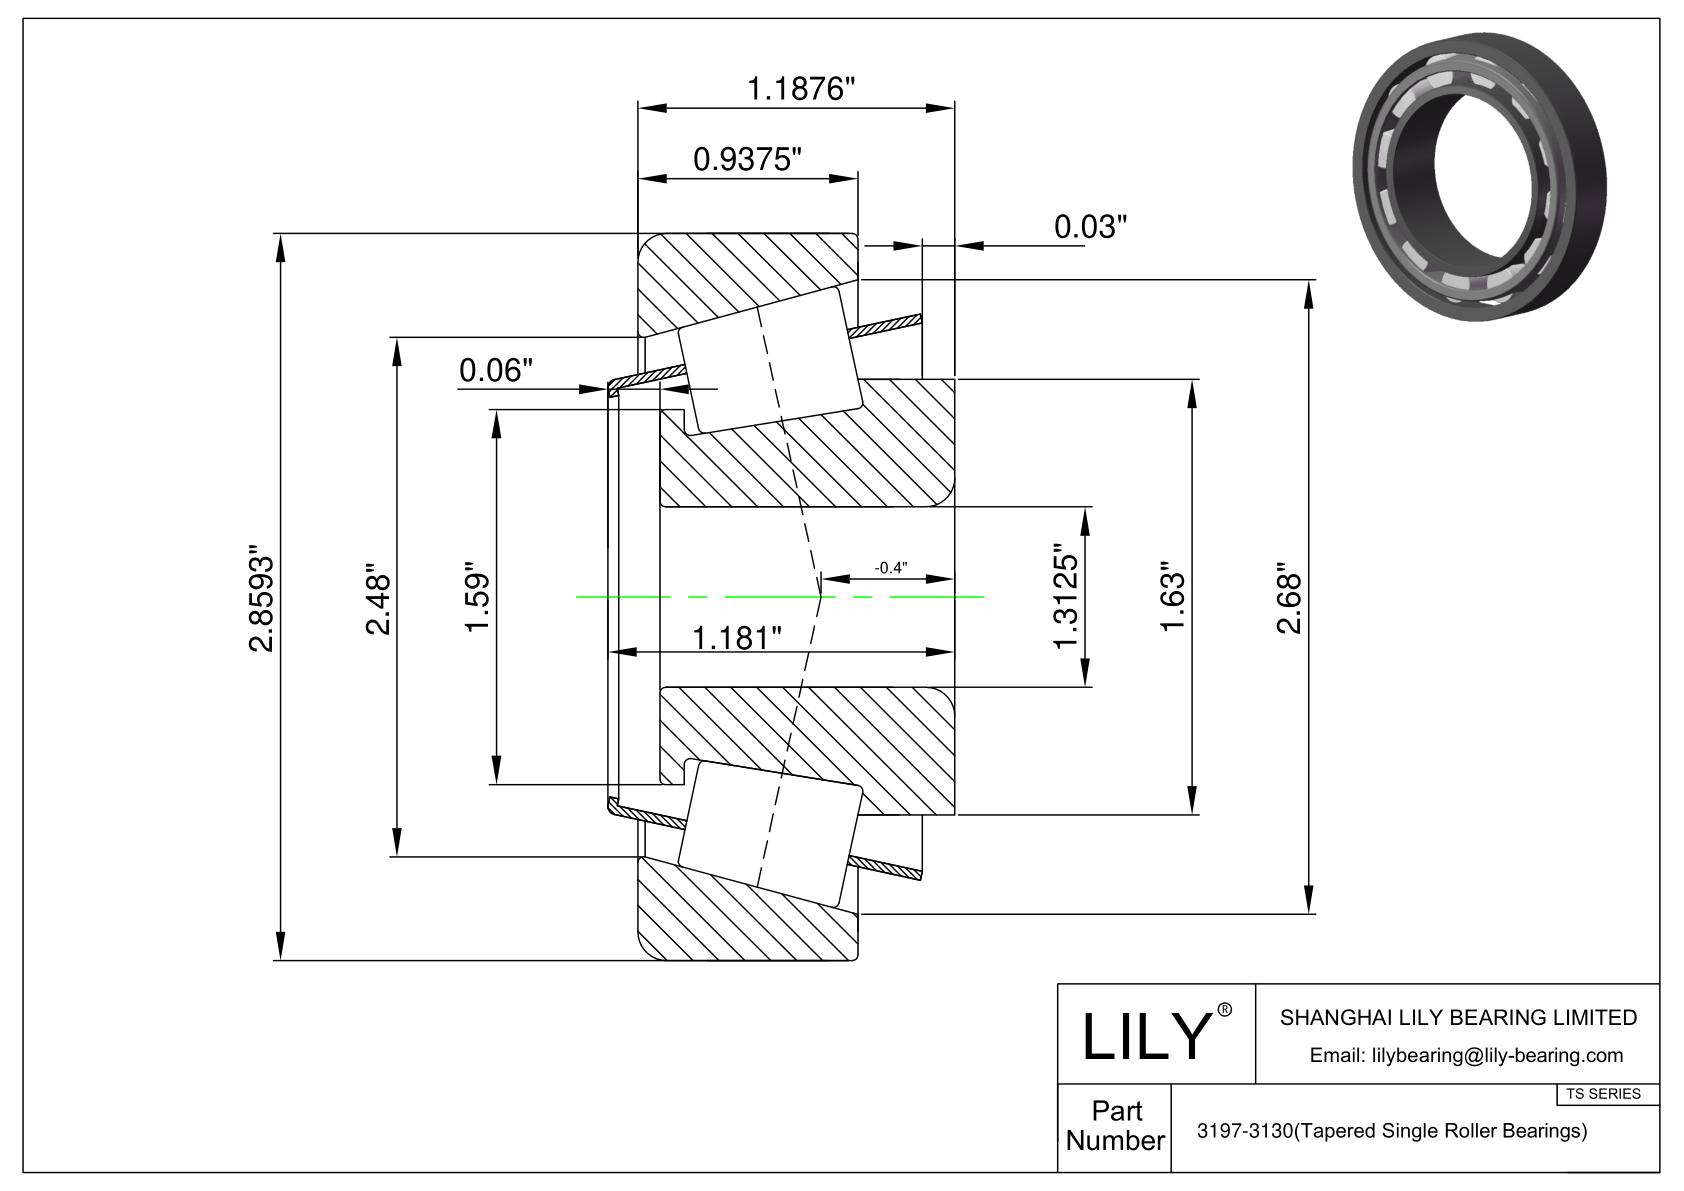 3197-3130 TS (Tapered Single Roller Bearings) (Imperial) cad drawing